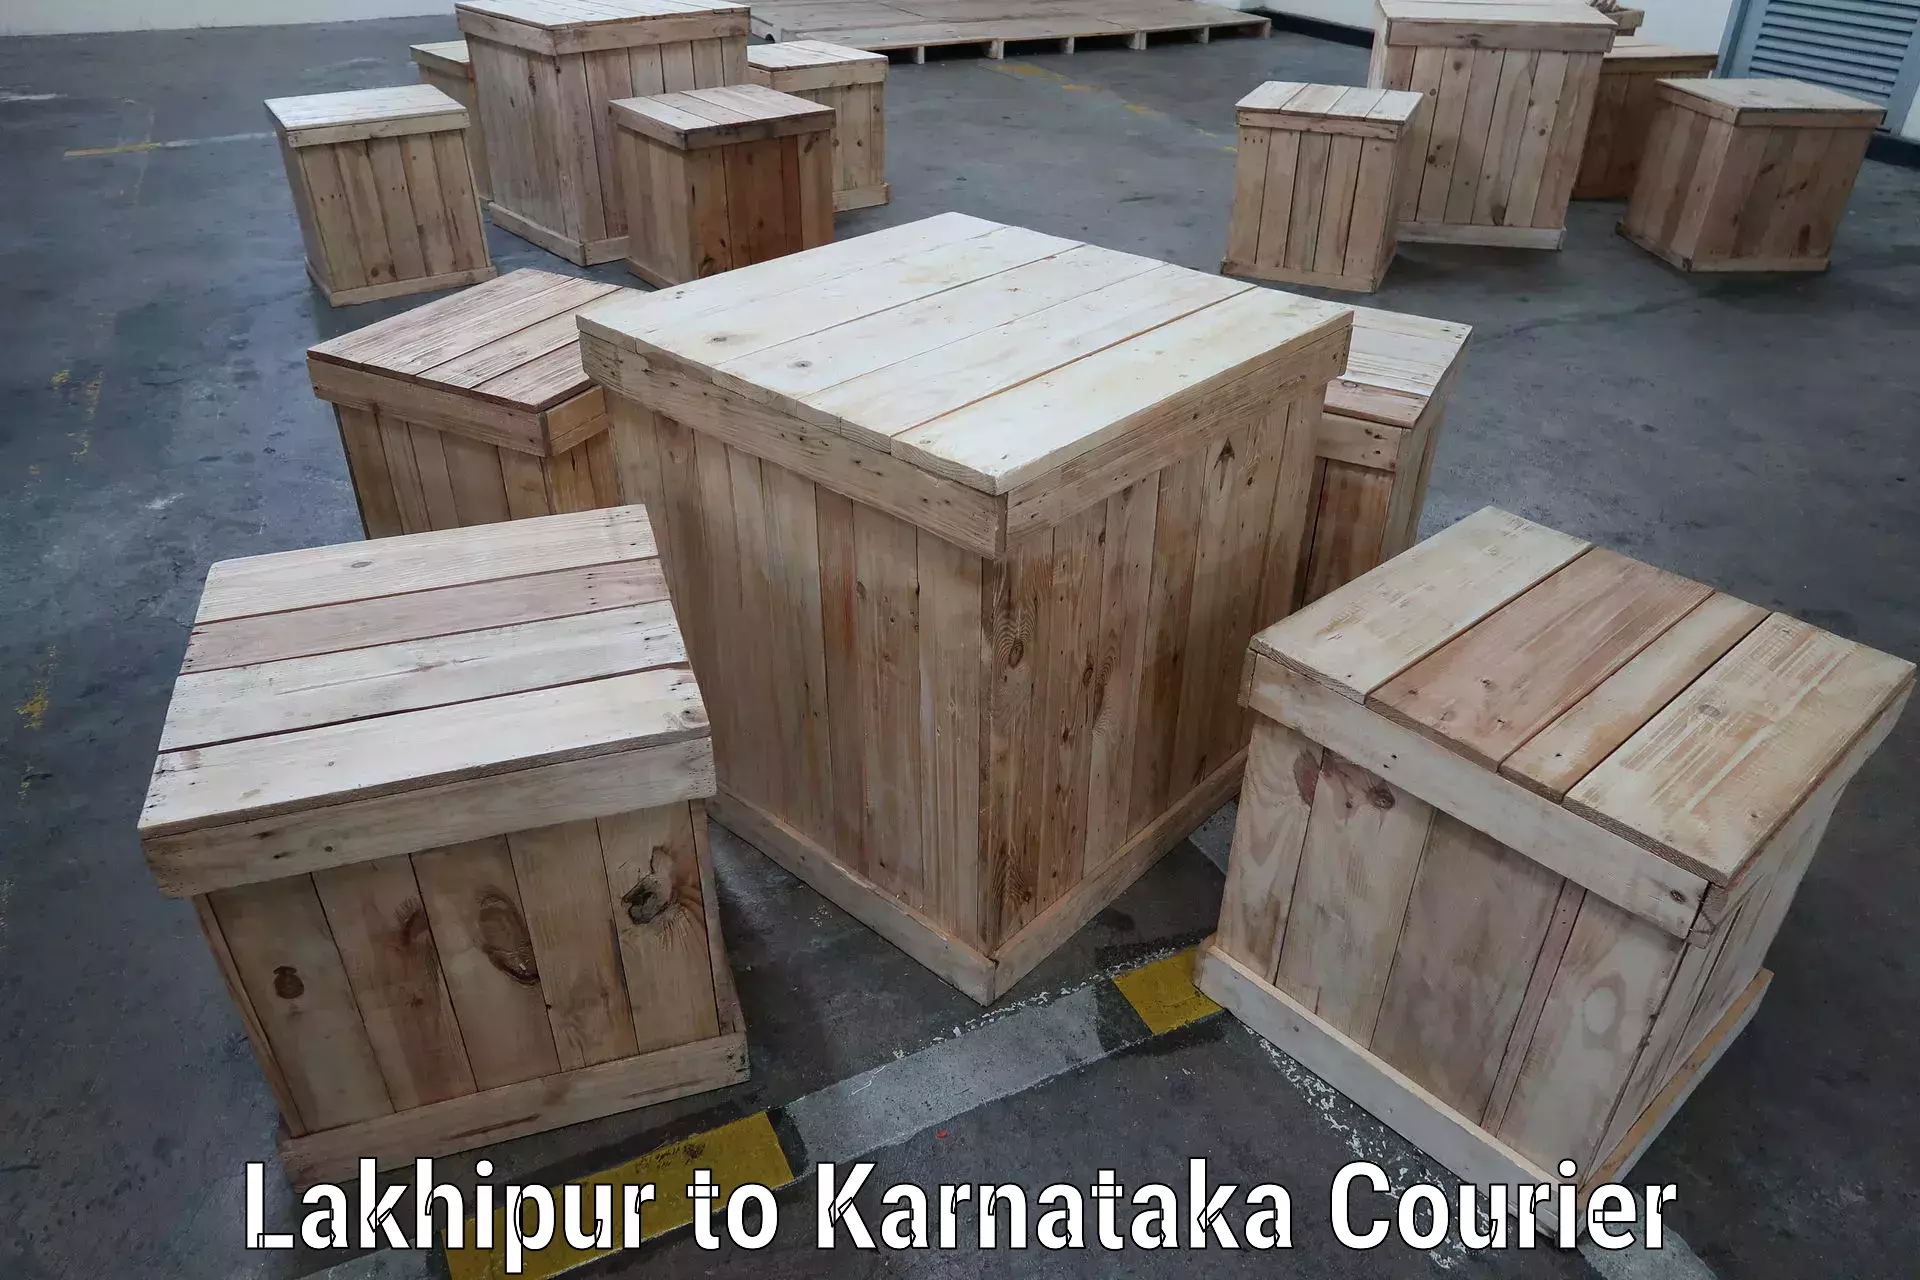 State-of-the-art courier technology Lakhipur to Karnataka